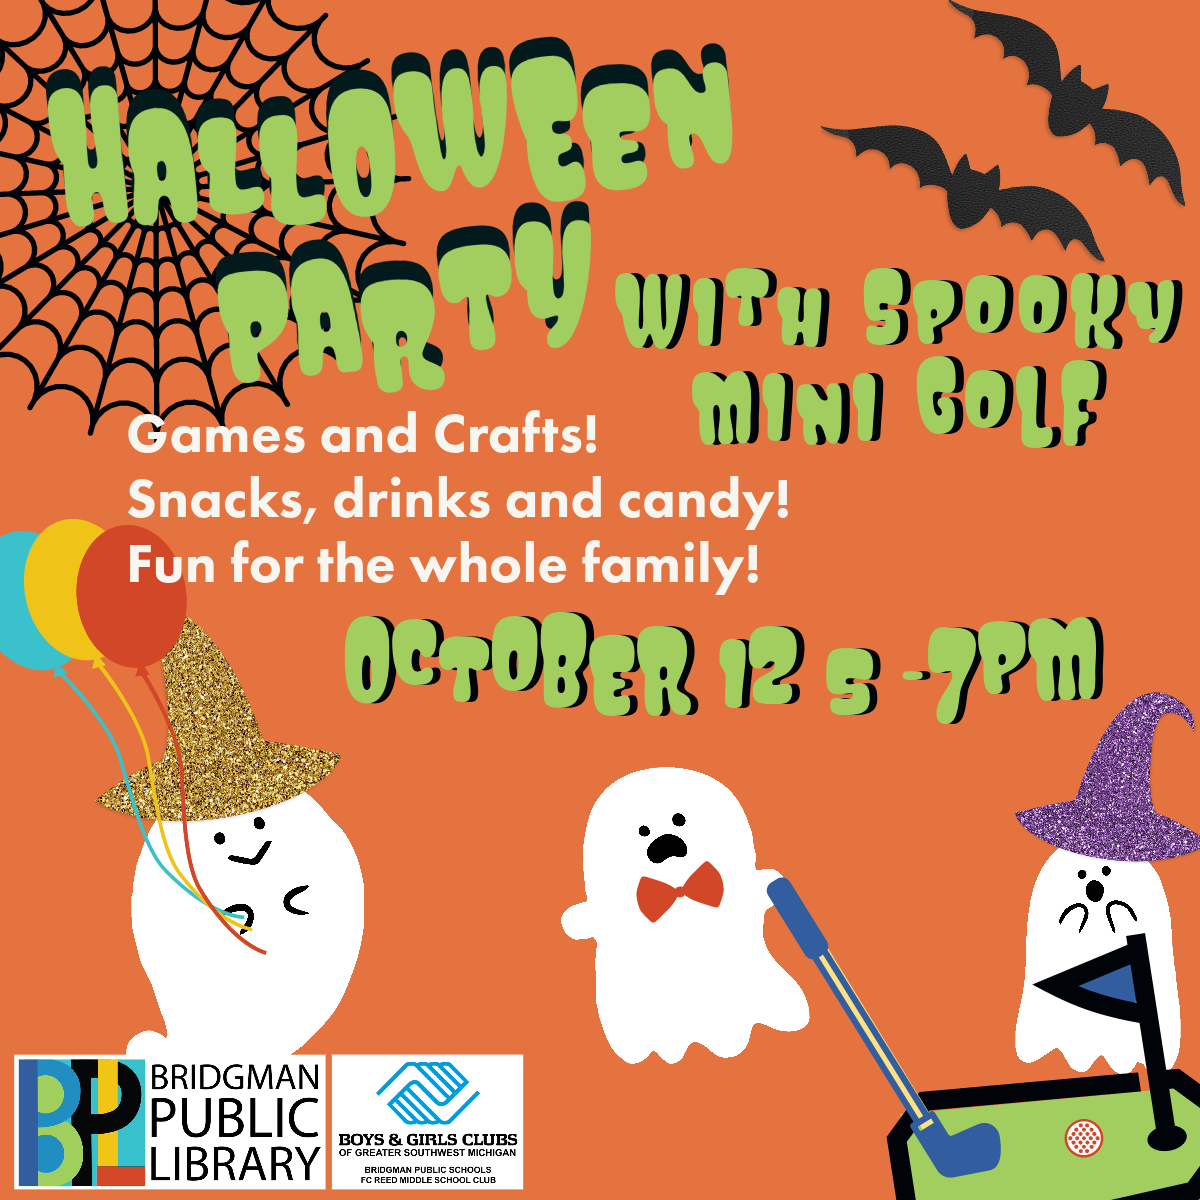 Our Halloween party is back, now with spooky mini golf. Fun for the whole family.